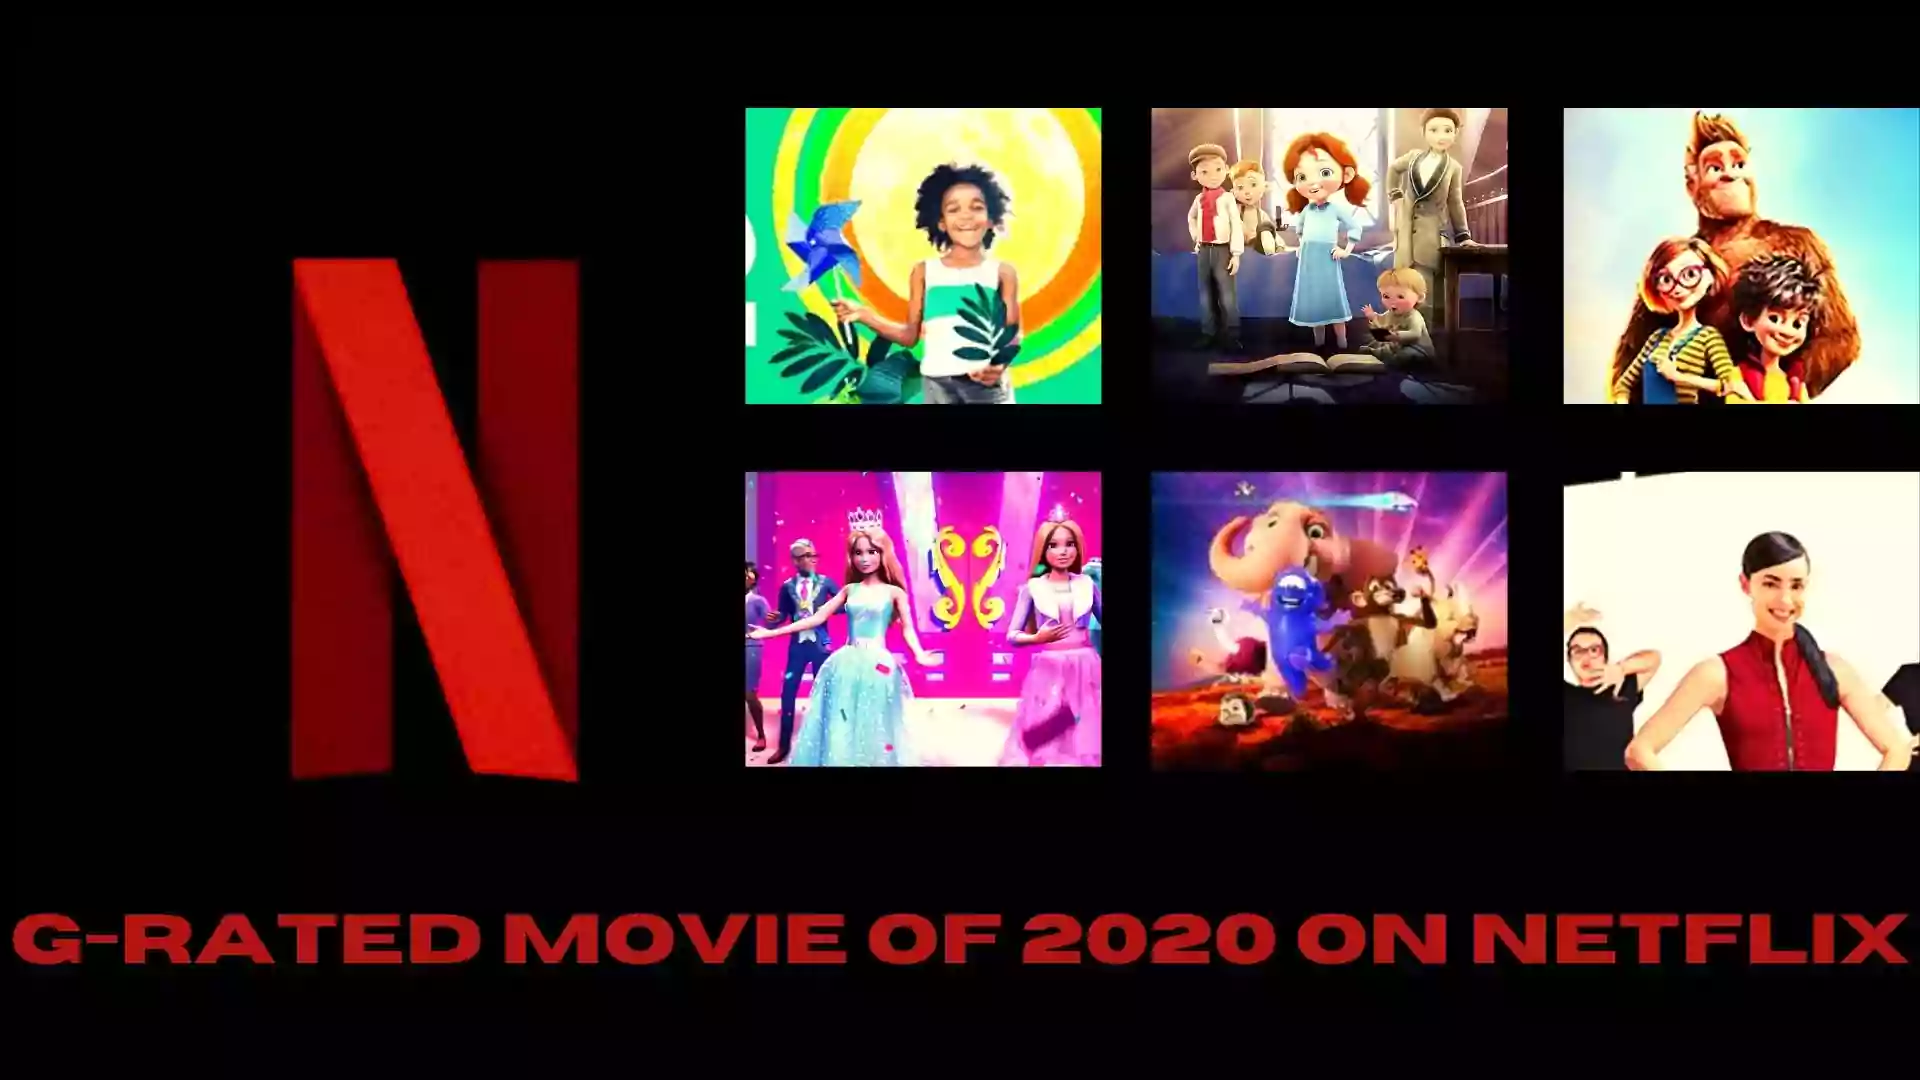 G-Rated Movie of 2020 on Netflix